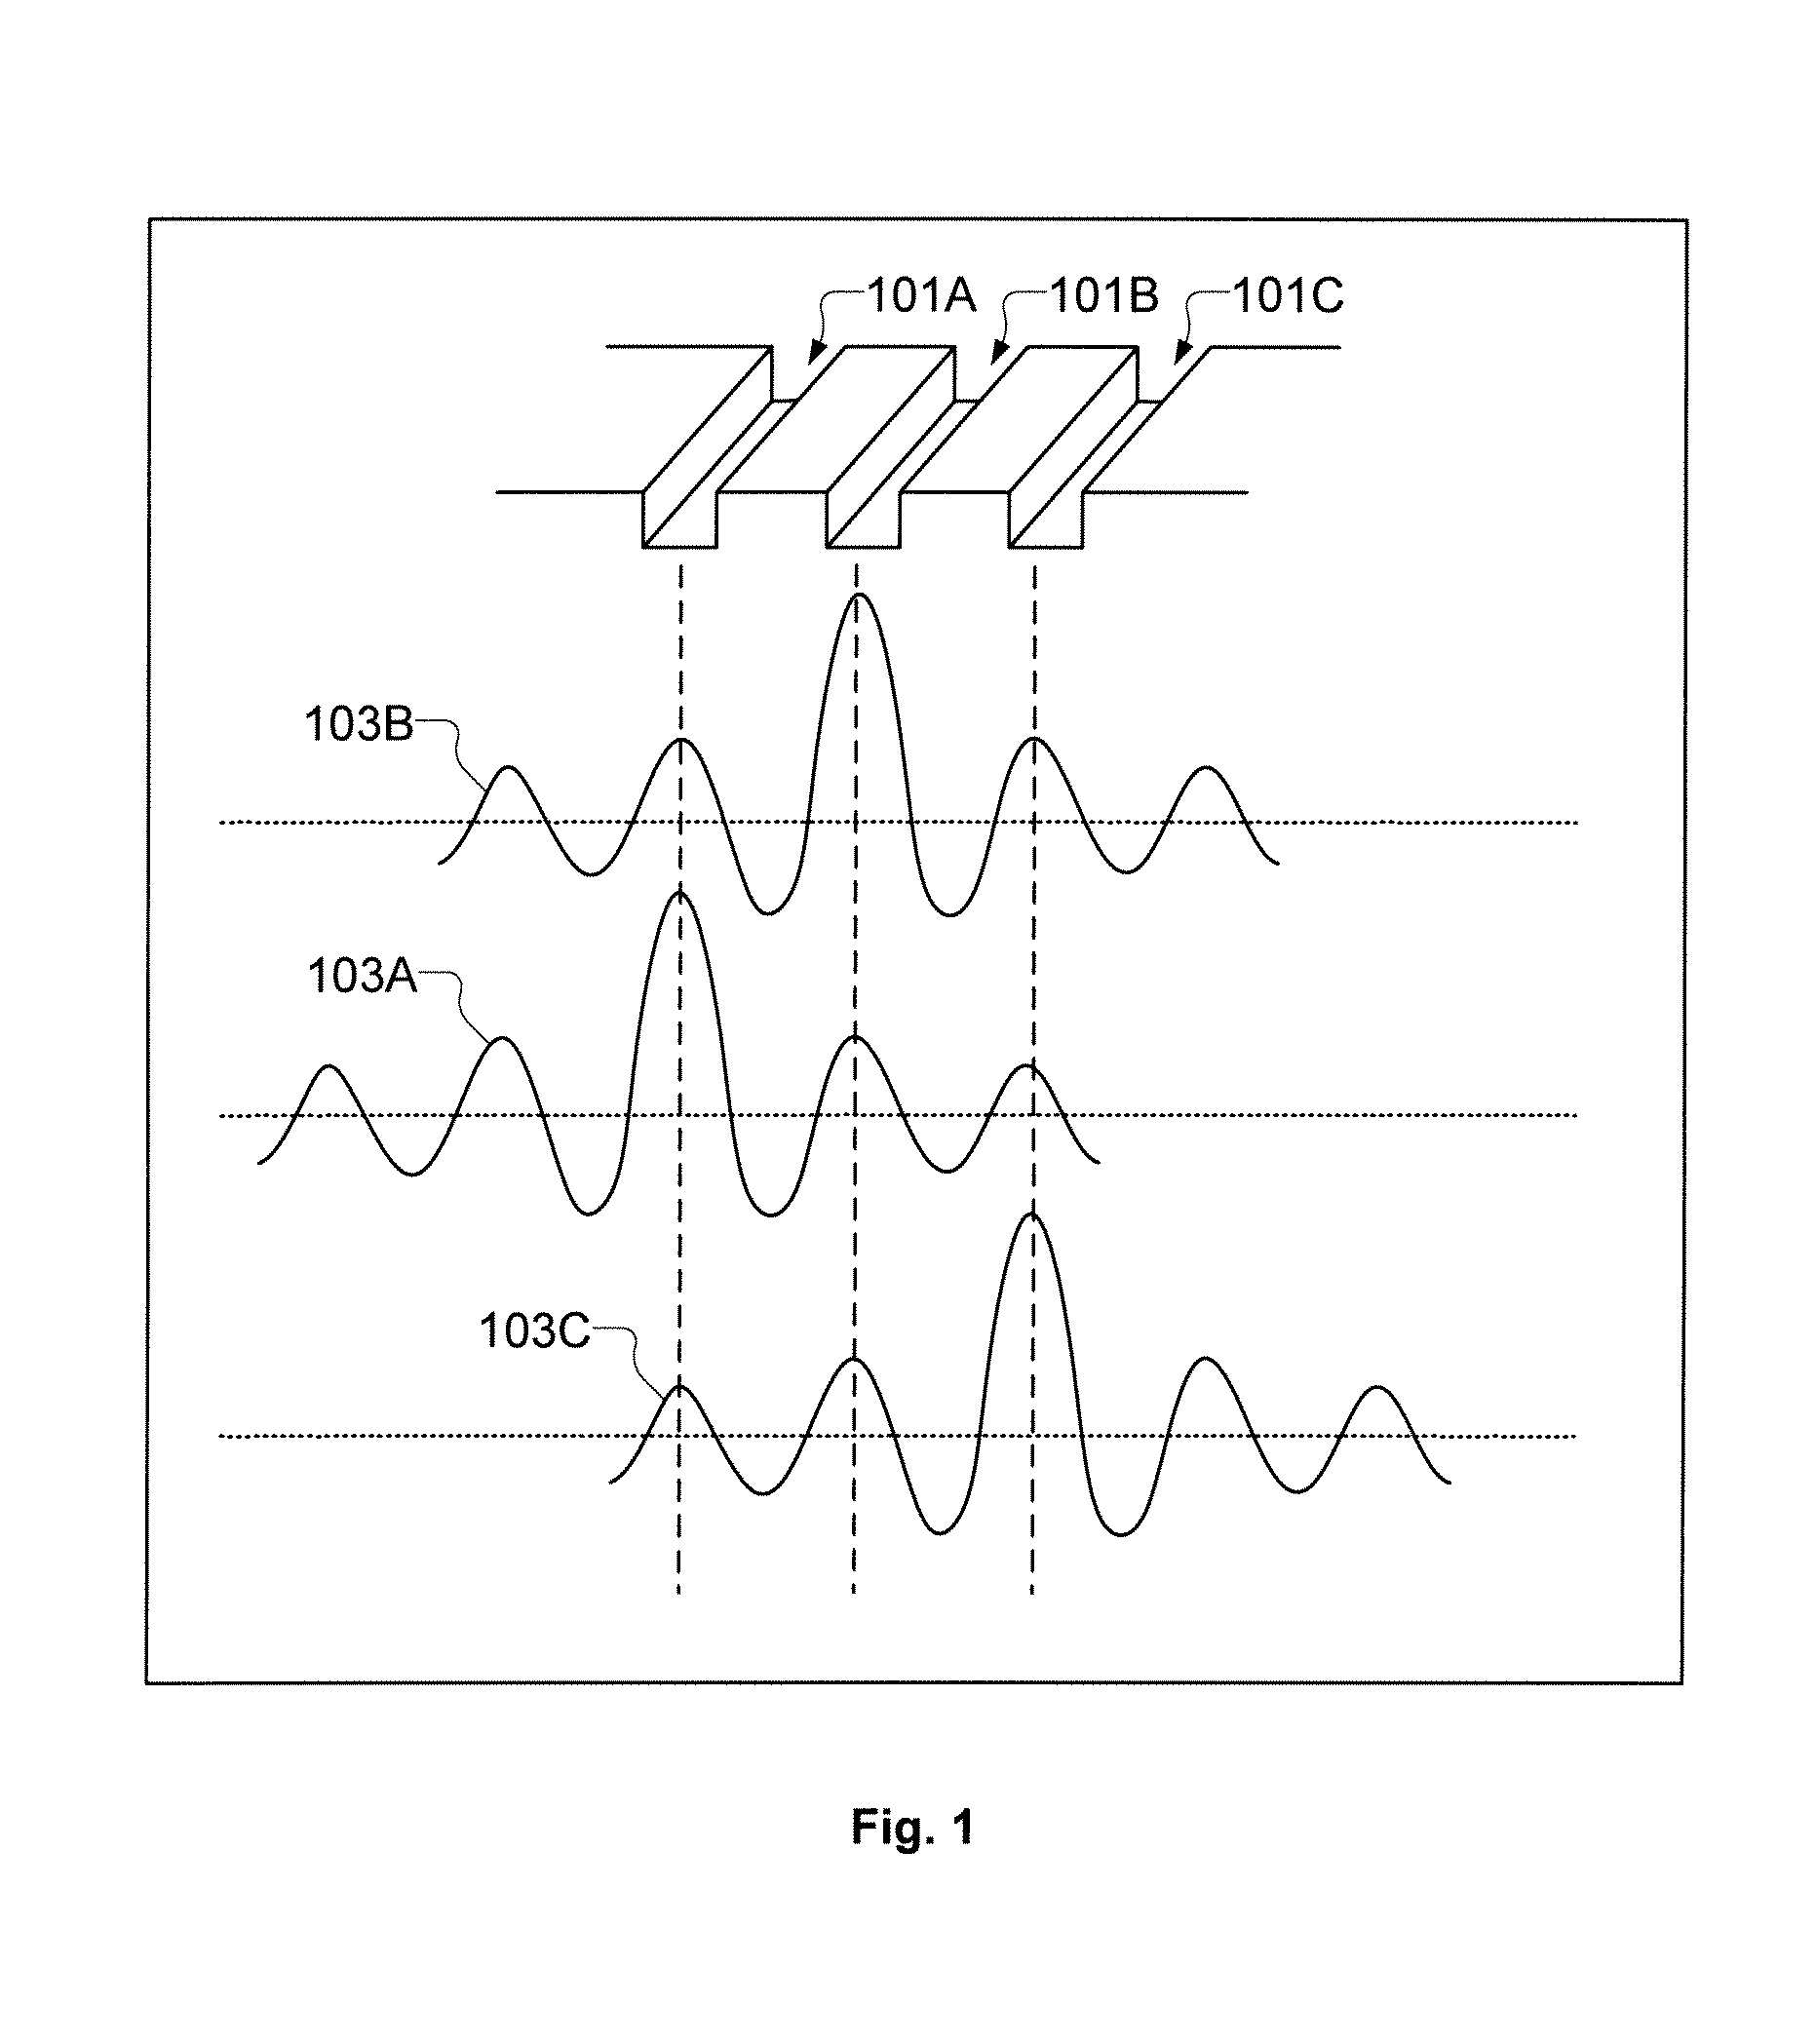 Semiconductor device and associated layouts having transistors formed from six linear conductive segments with gate electrode connection through single interconnect level